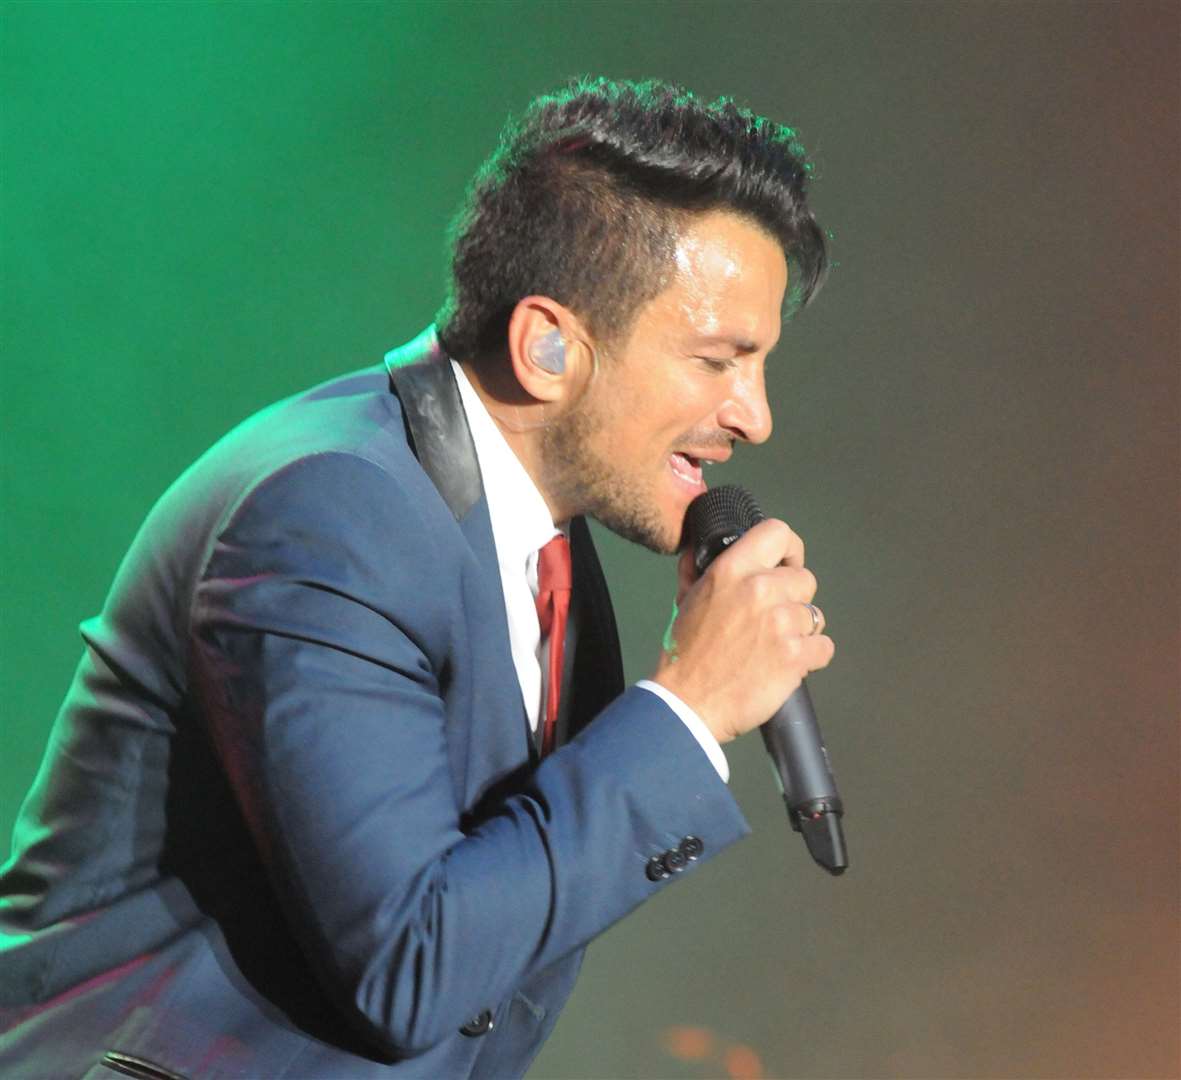 Peter Andre has previously performed in Kent at the Rochester Castle Concert. Picture: Steve Crispe